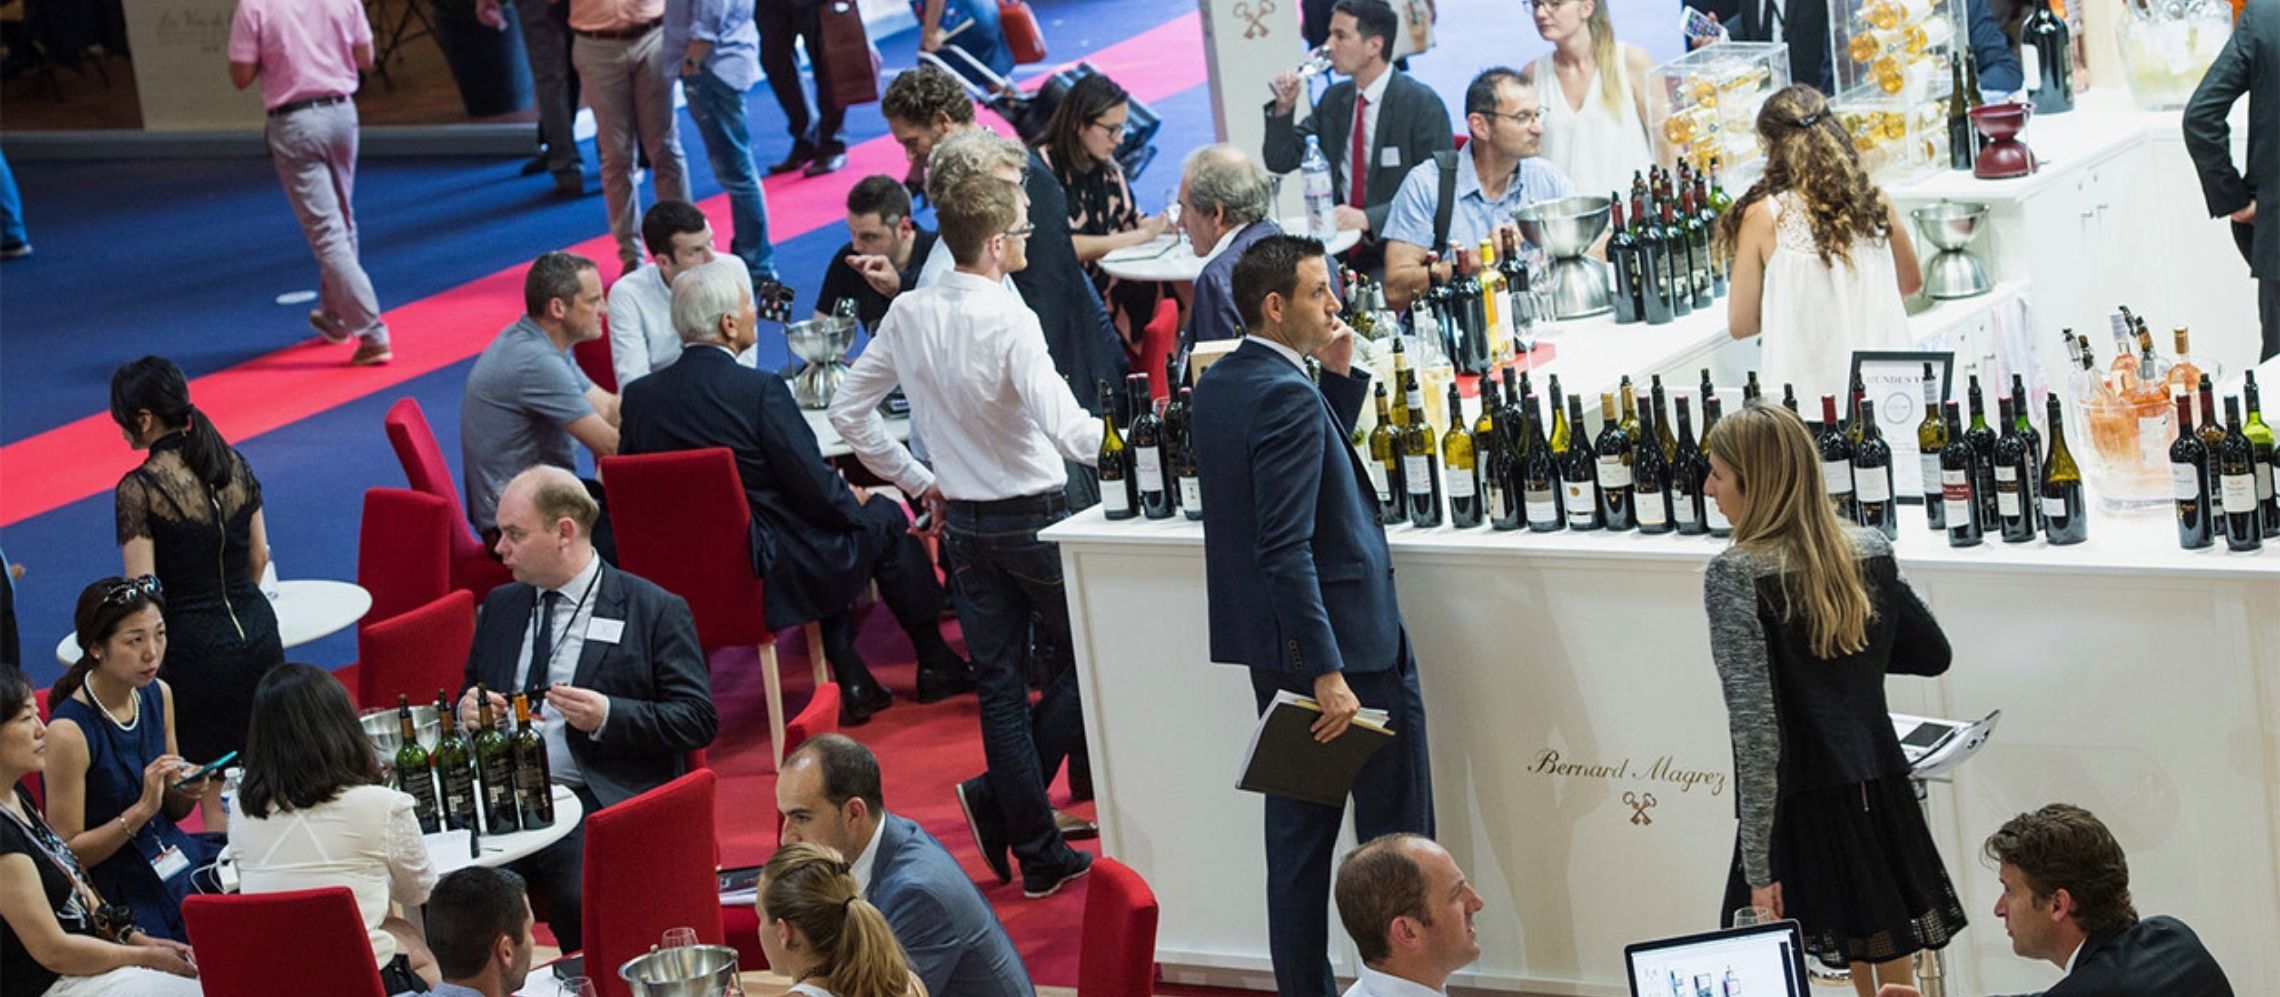 Photo for: Vinexpo Holding and Comexposium Merge To Build A Premier Wine & Spirits Business